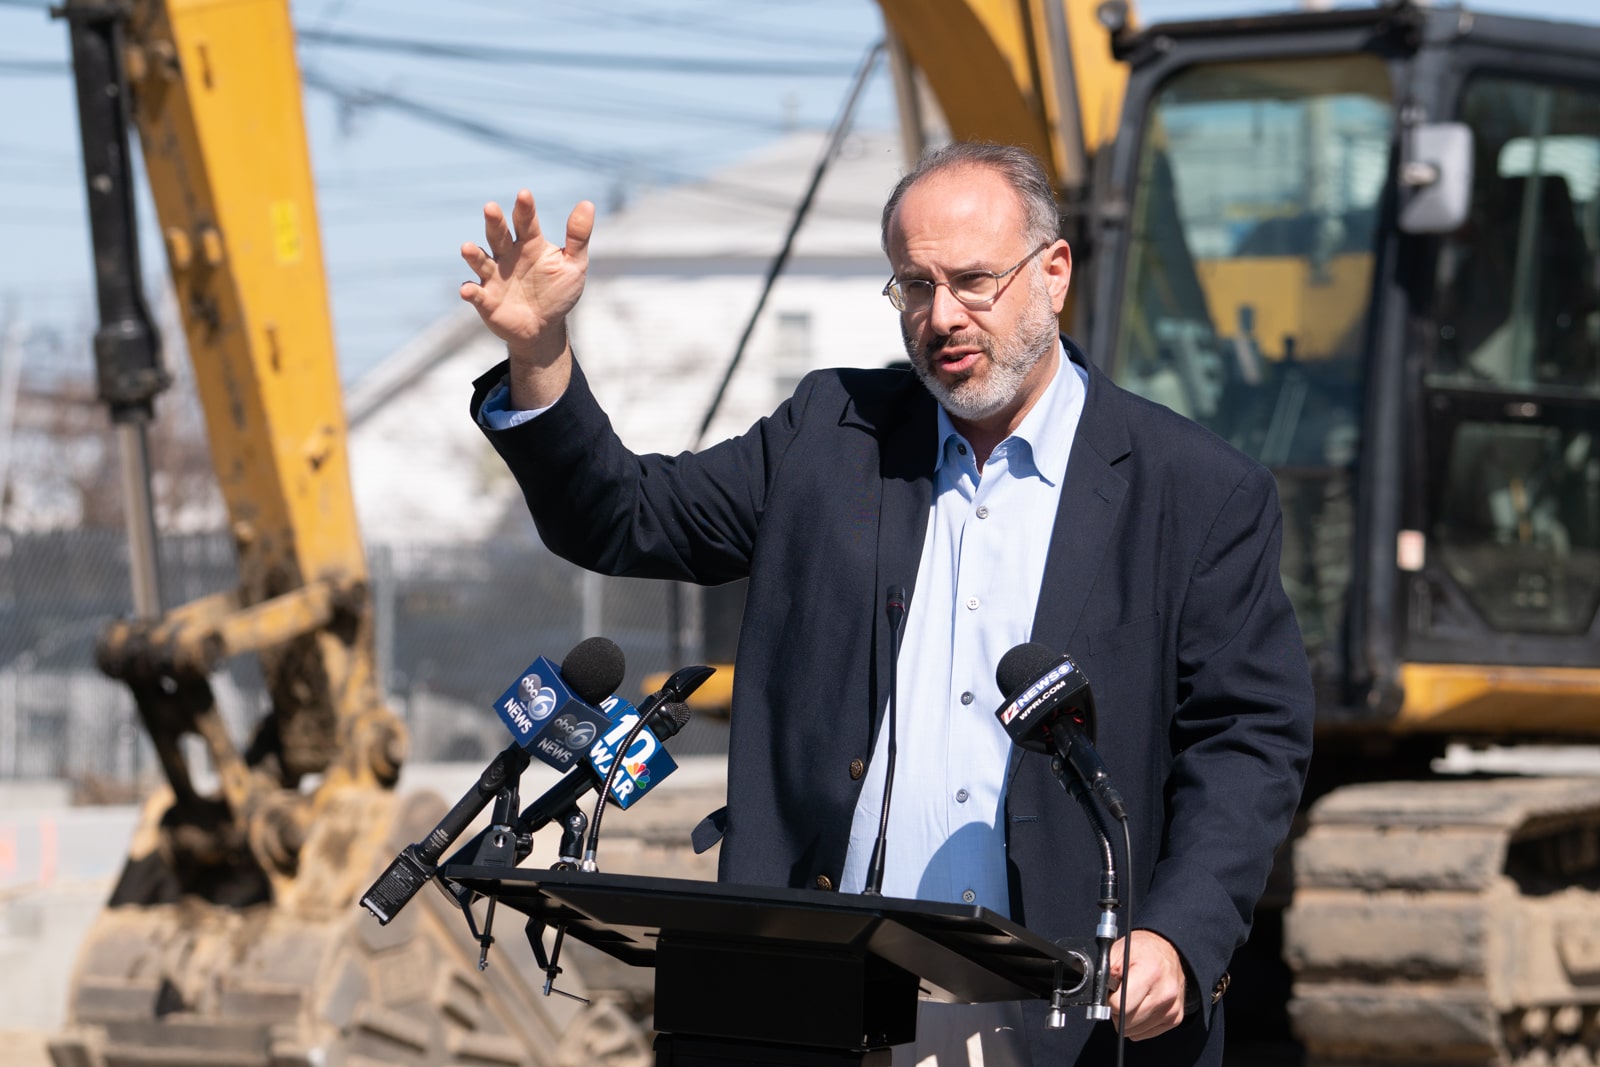 Stefan Pryor, Rhode Island's Secretary of Housing, speaks at the groundbreaking event for the Residences at Riverside Square on Monday, April 10, 2023. Photo by Stephen Ide/ONE Neighborhood Builders